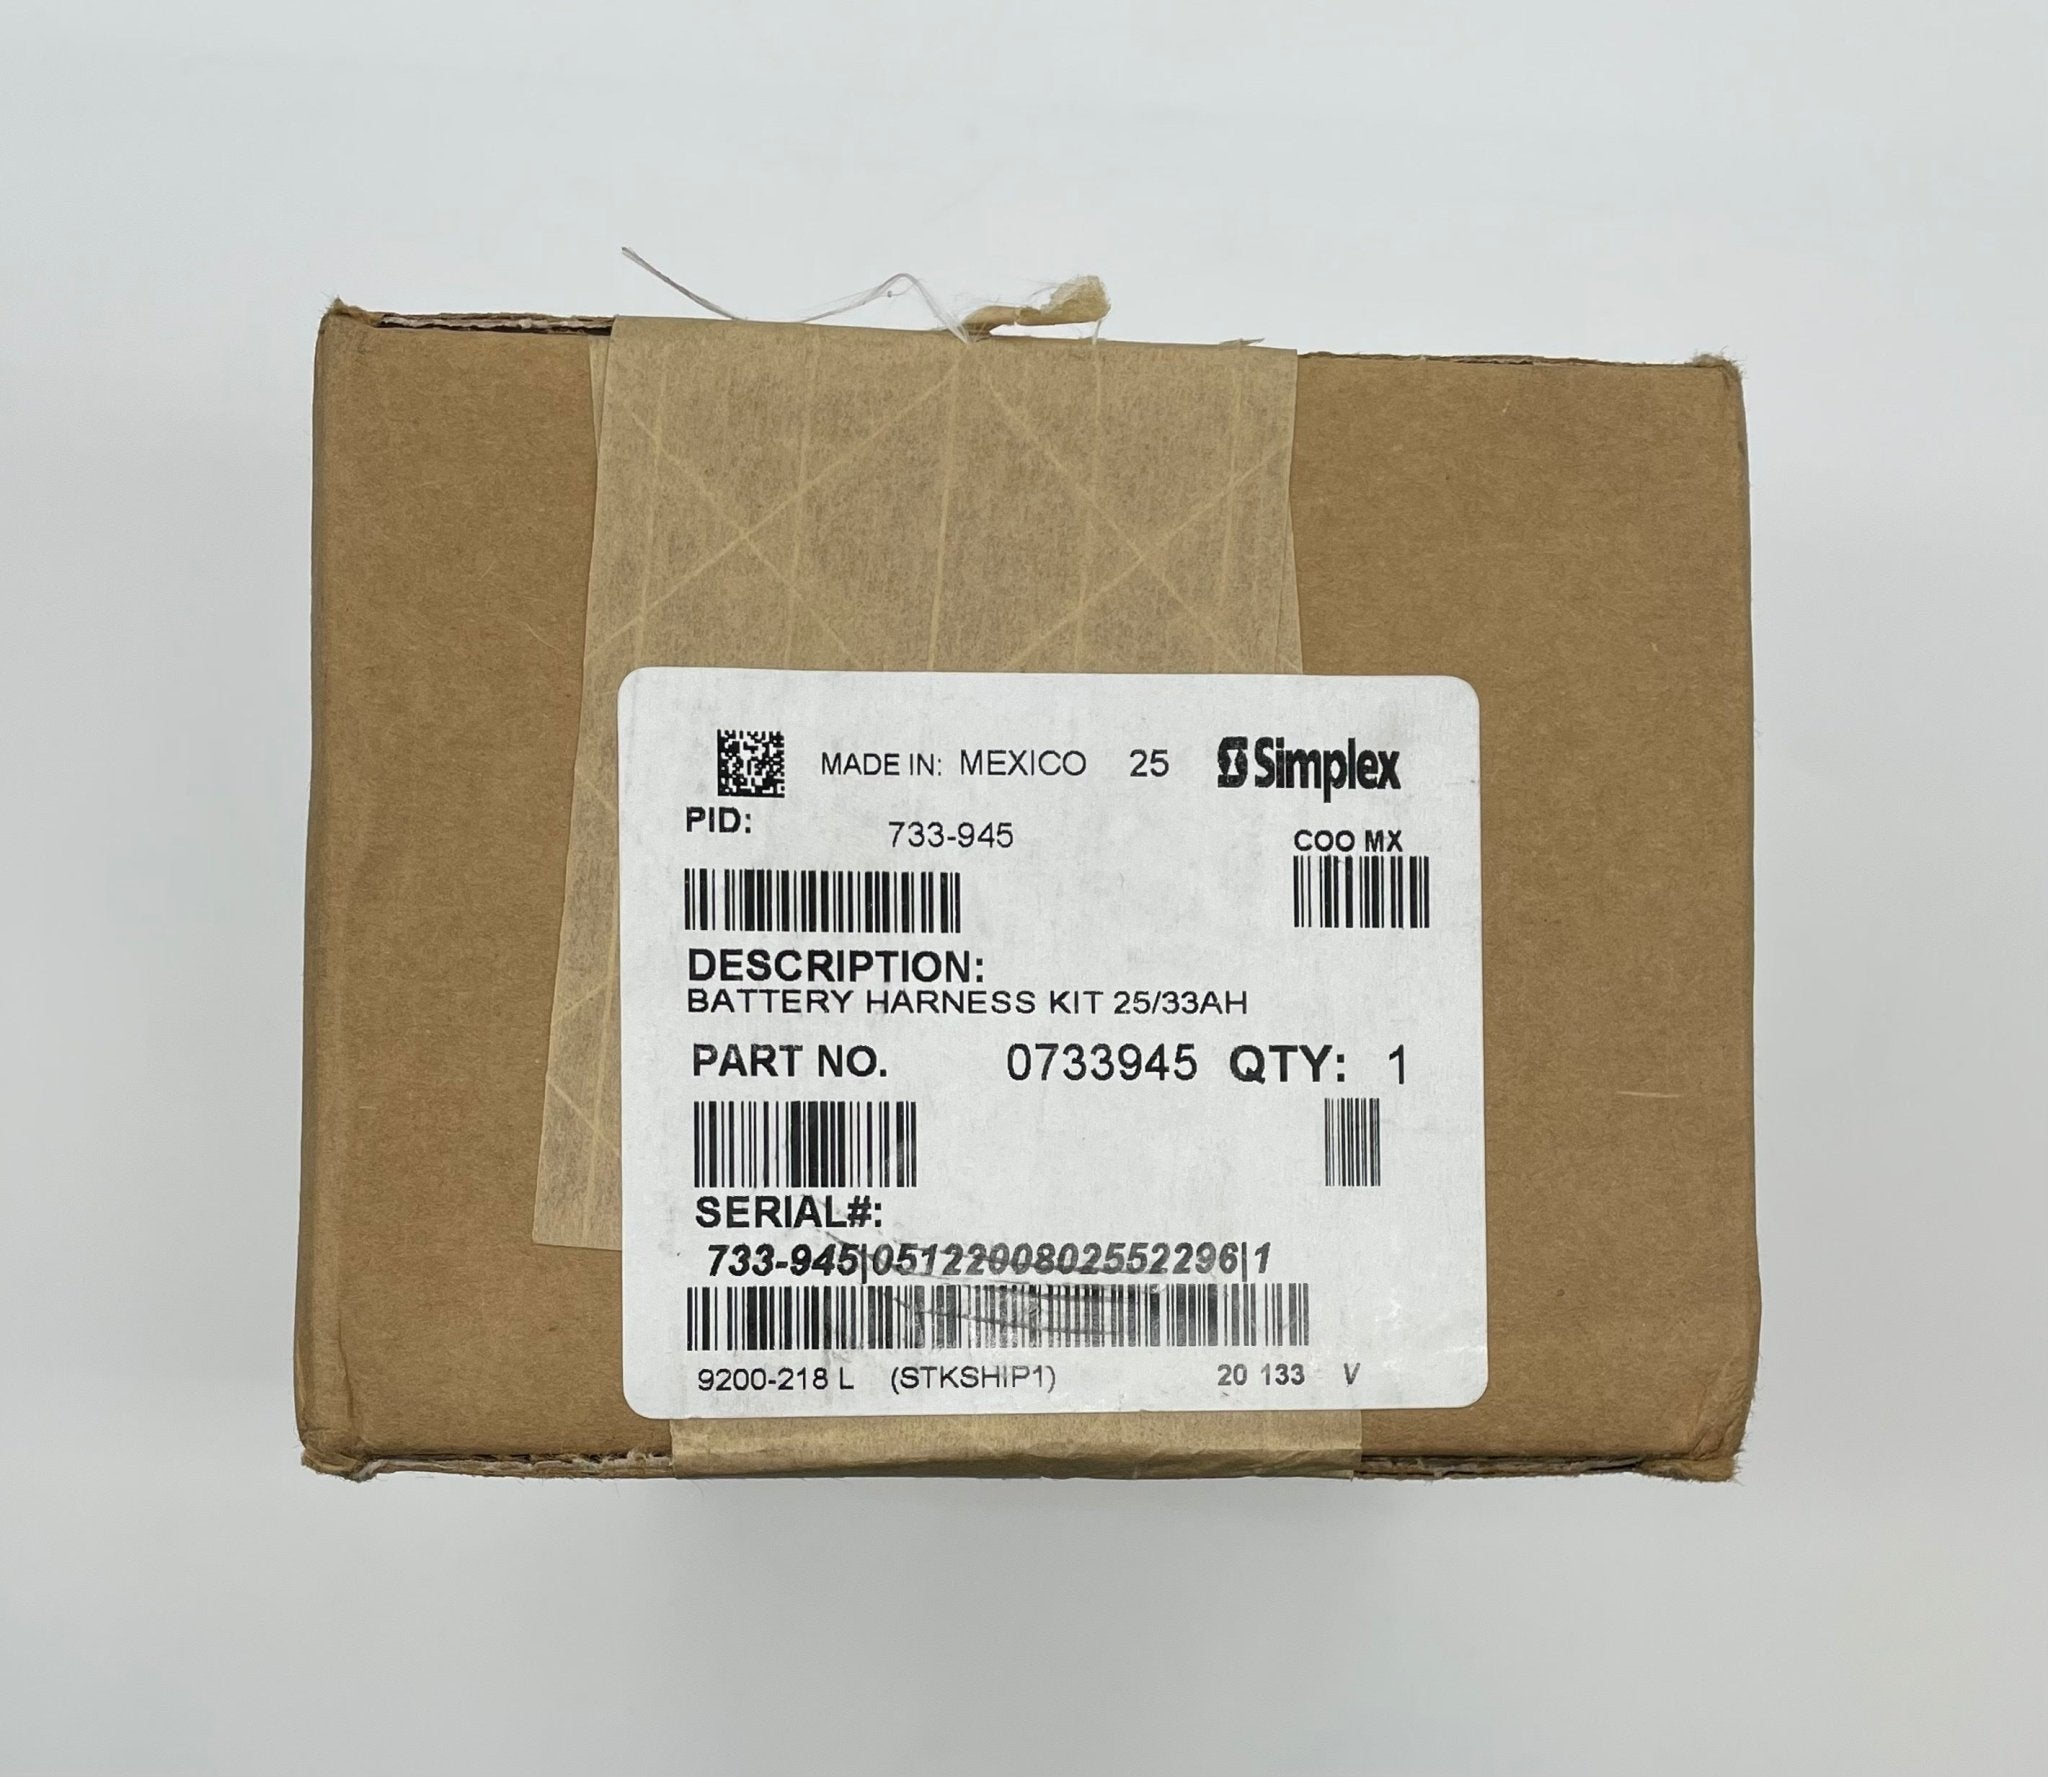 Simplex 733-945 Battery Harness Kit - The Fire Alarm Supplier